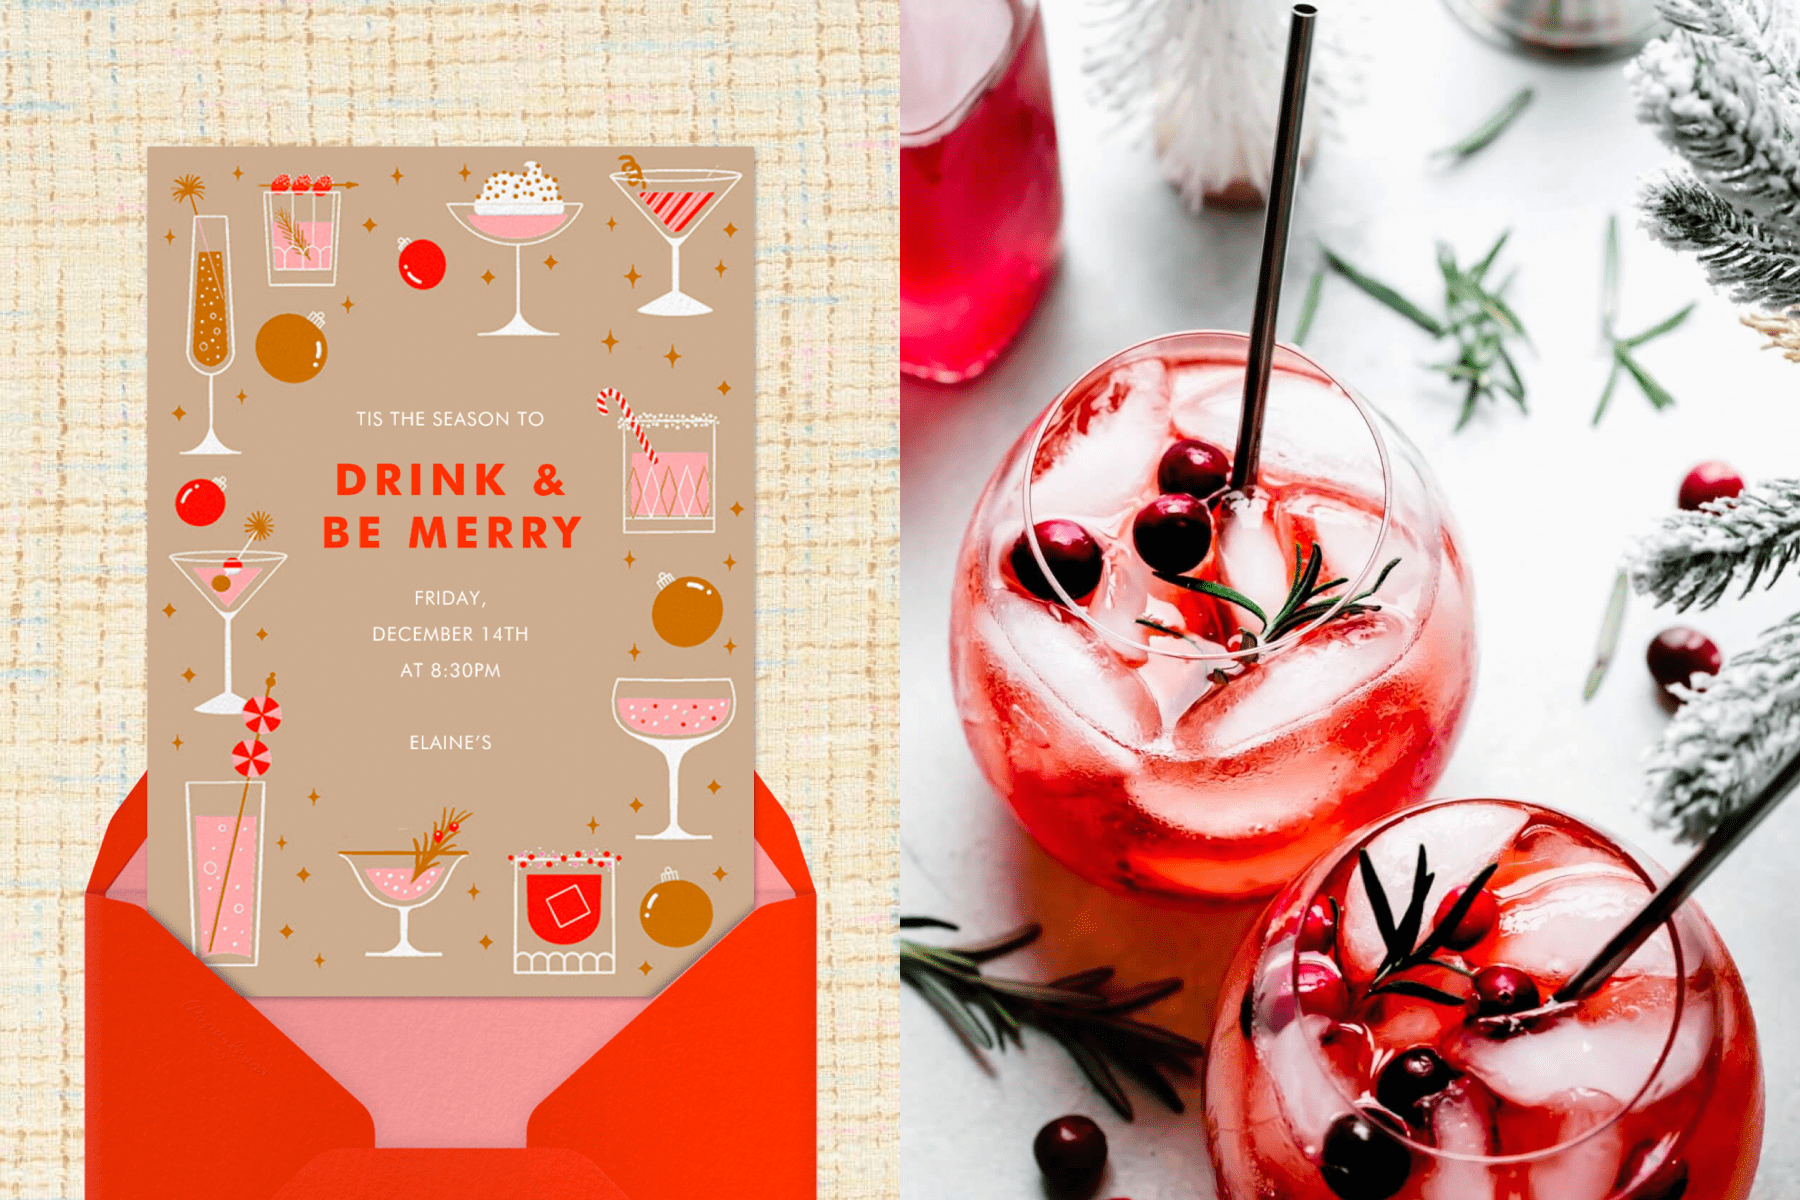 left: A holiday cocktail party invitation with a tan background and simplified pink, red, and tan illustrations of seasonal cocktails and ornaments. Right: A close-up photograph of two red cocktails on the rocks in stemless glasses garnished with cranberries and fir sprigs